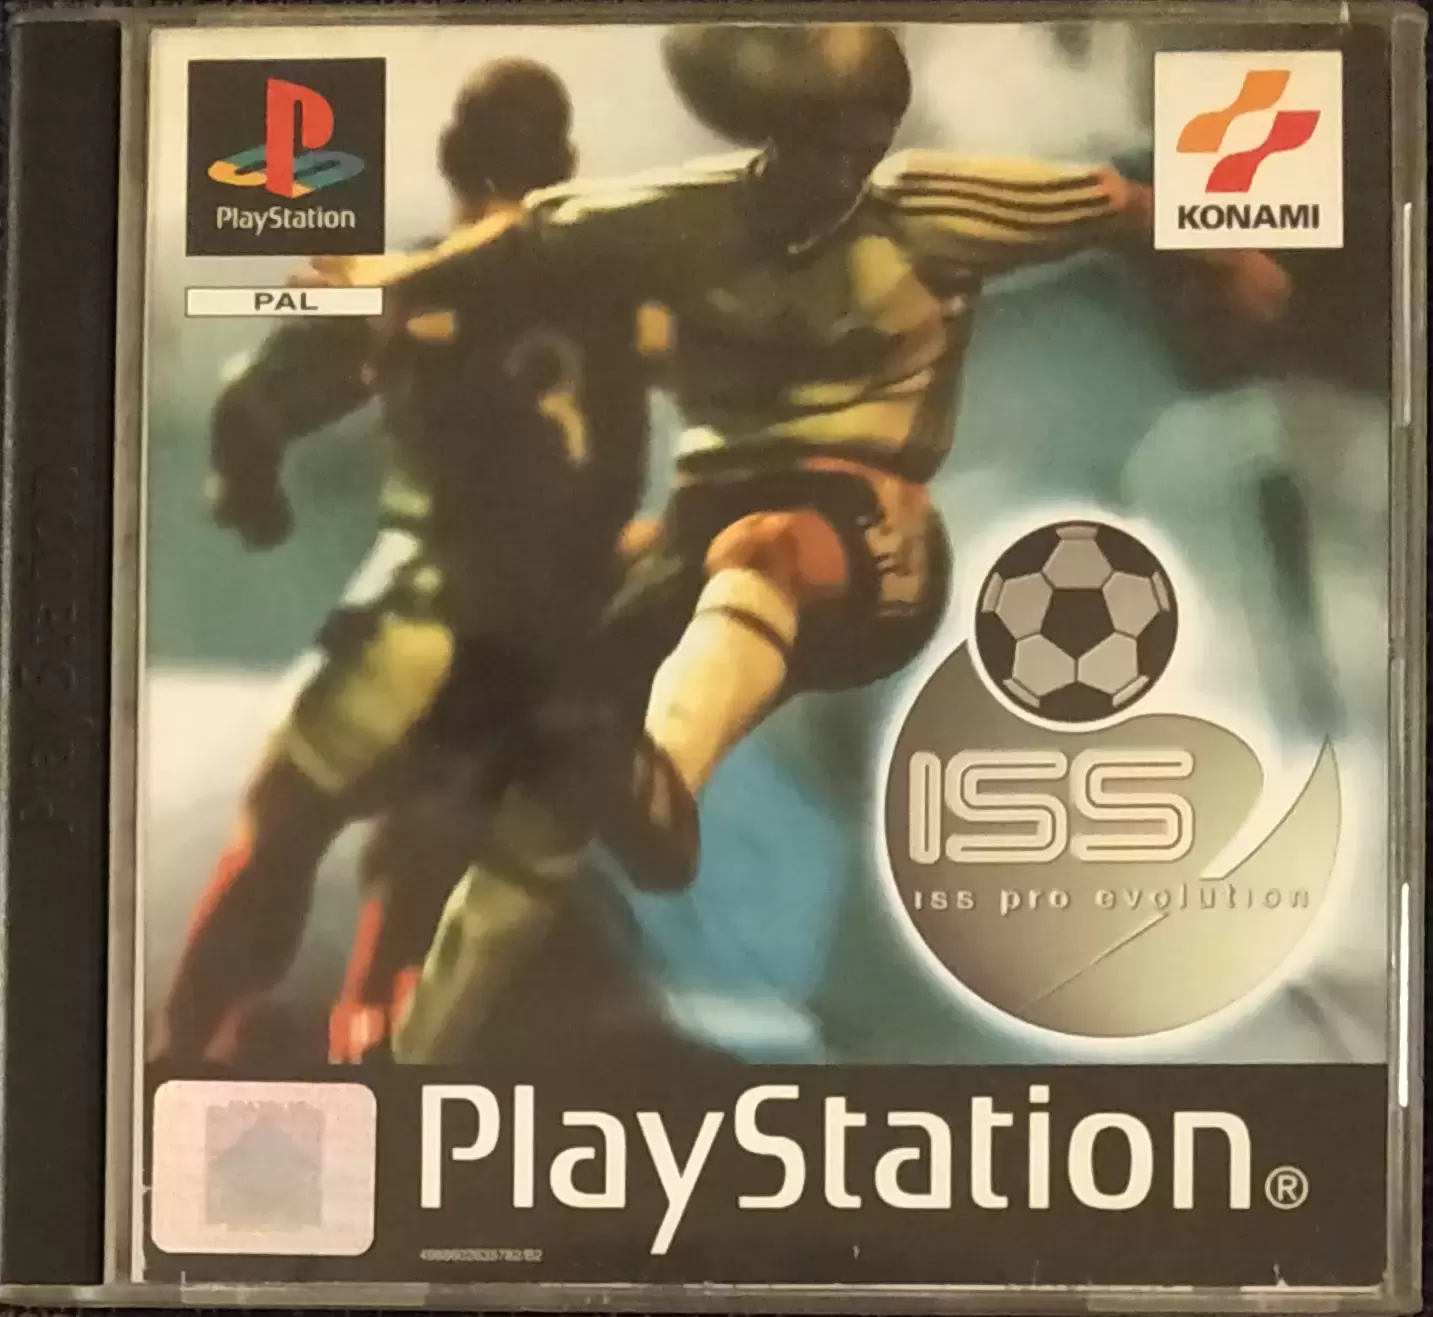 Playstation games - ISS Pro Evolution